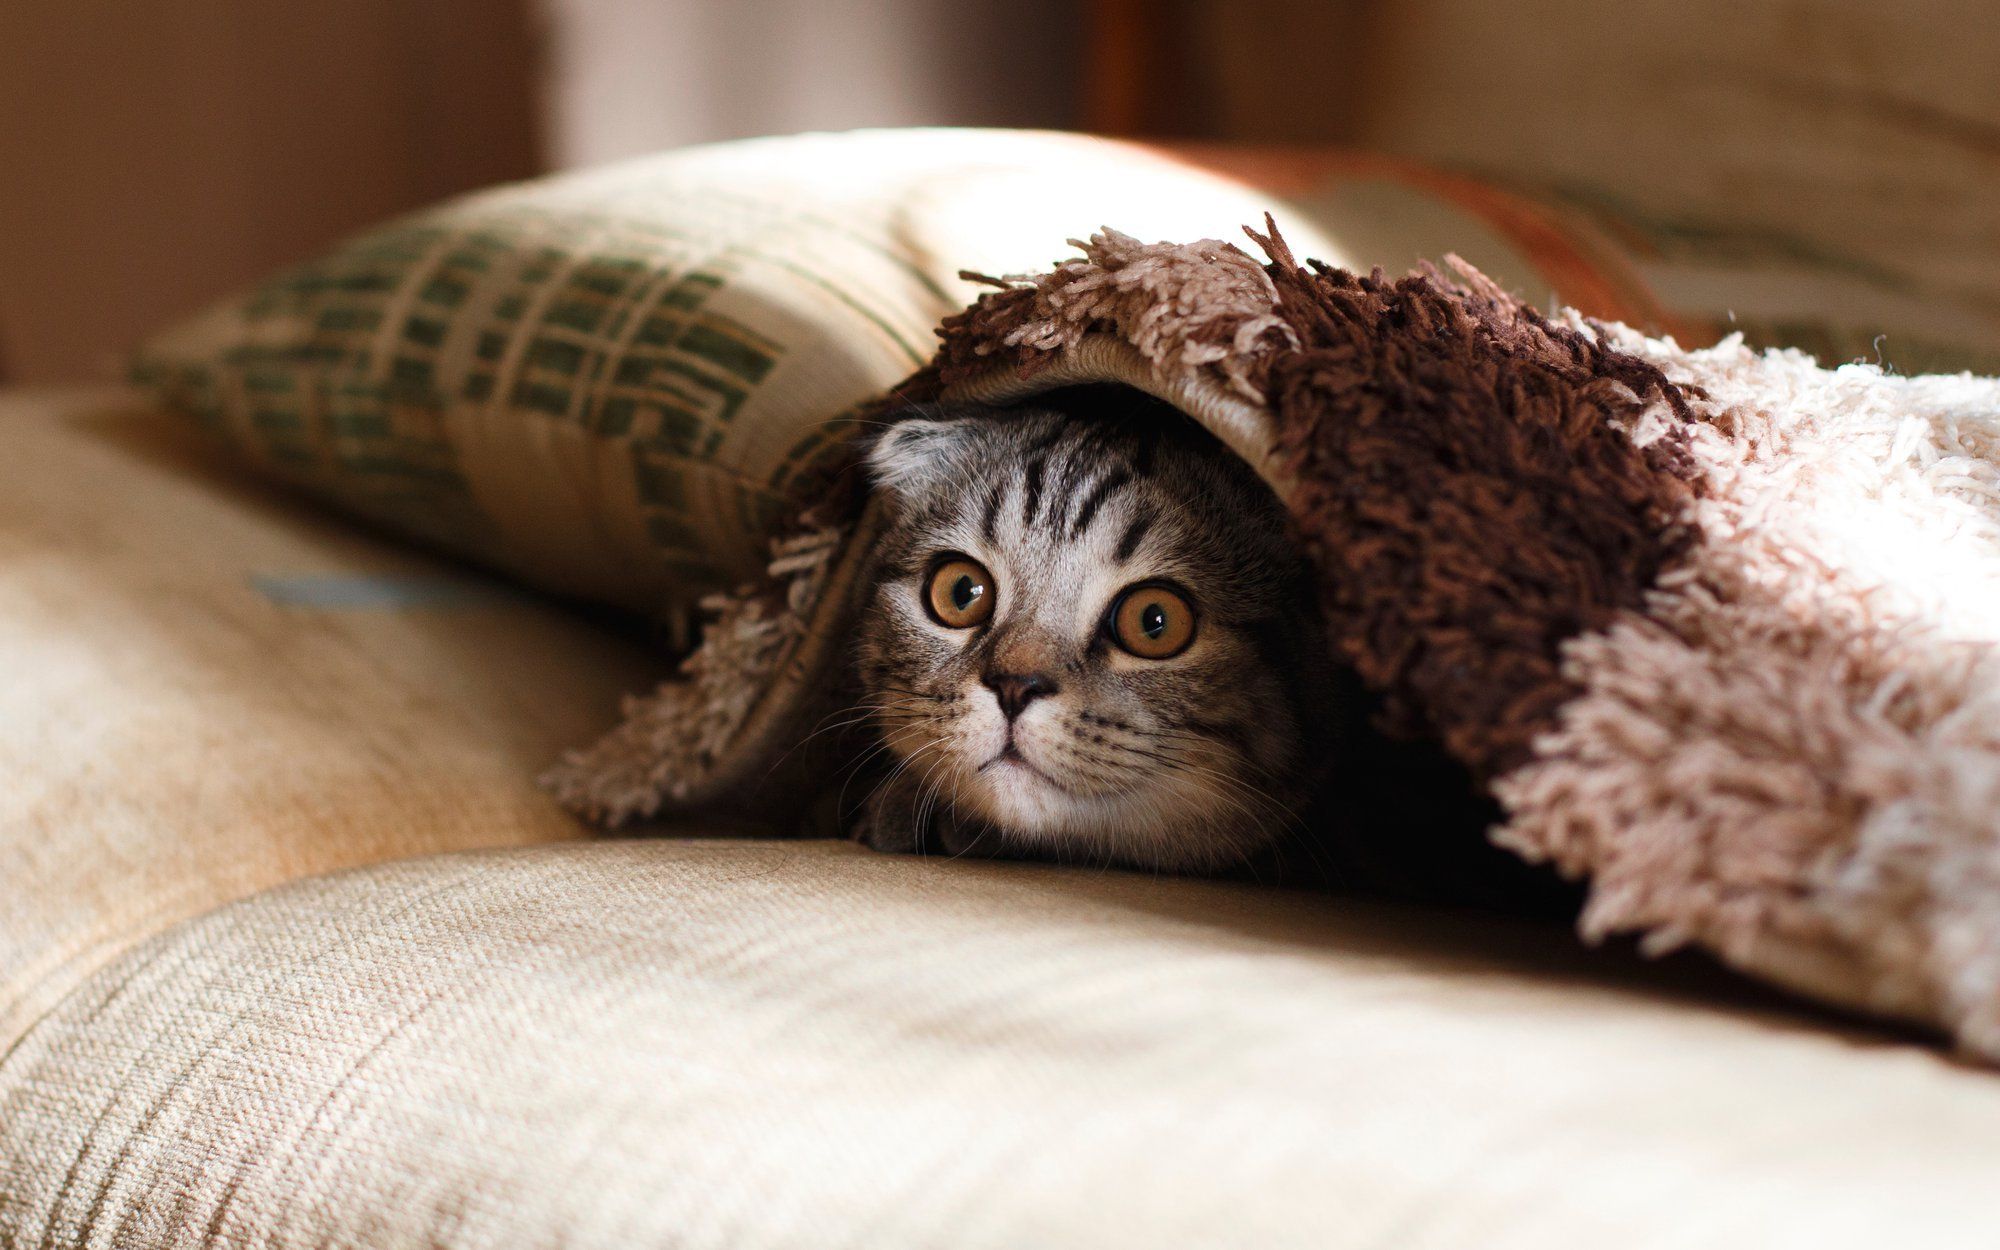 Preventing Cat Anxiety: Ways to Entertain Your Cat While You're Away